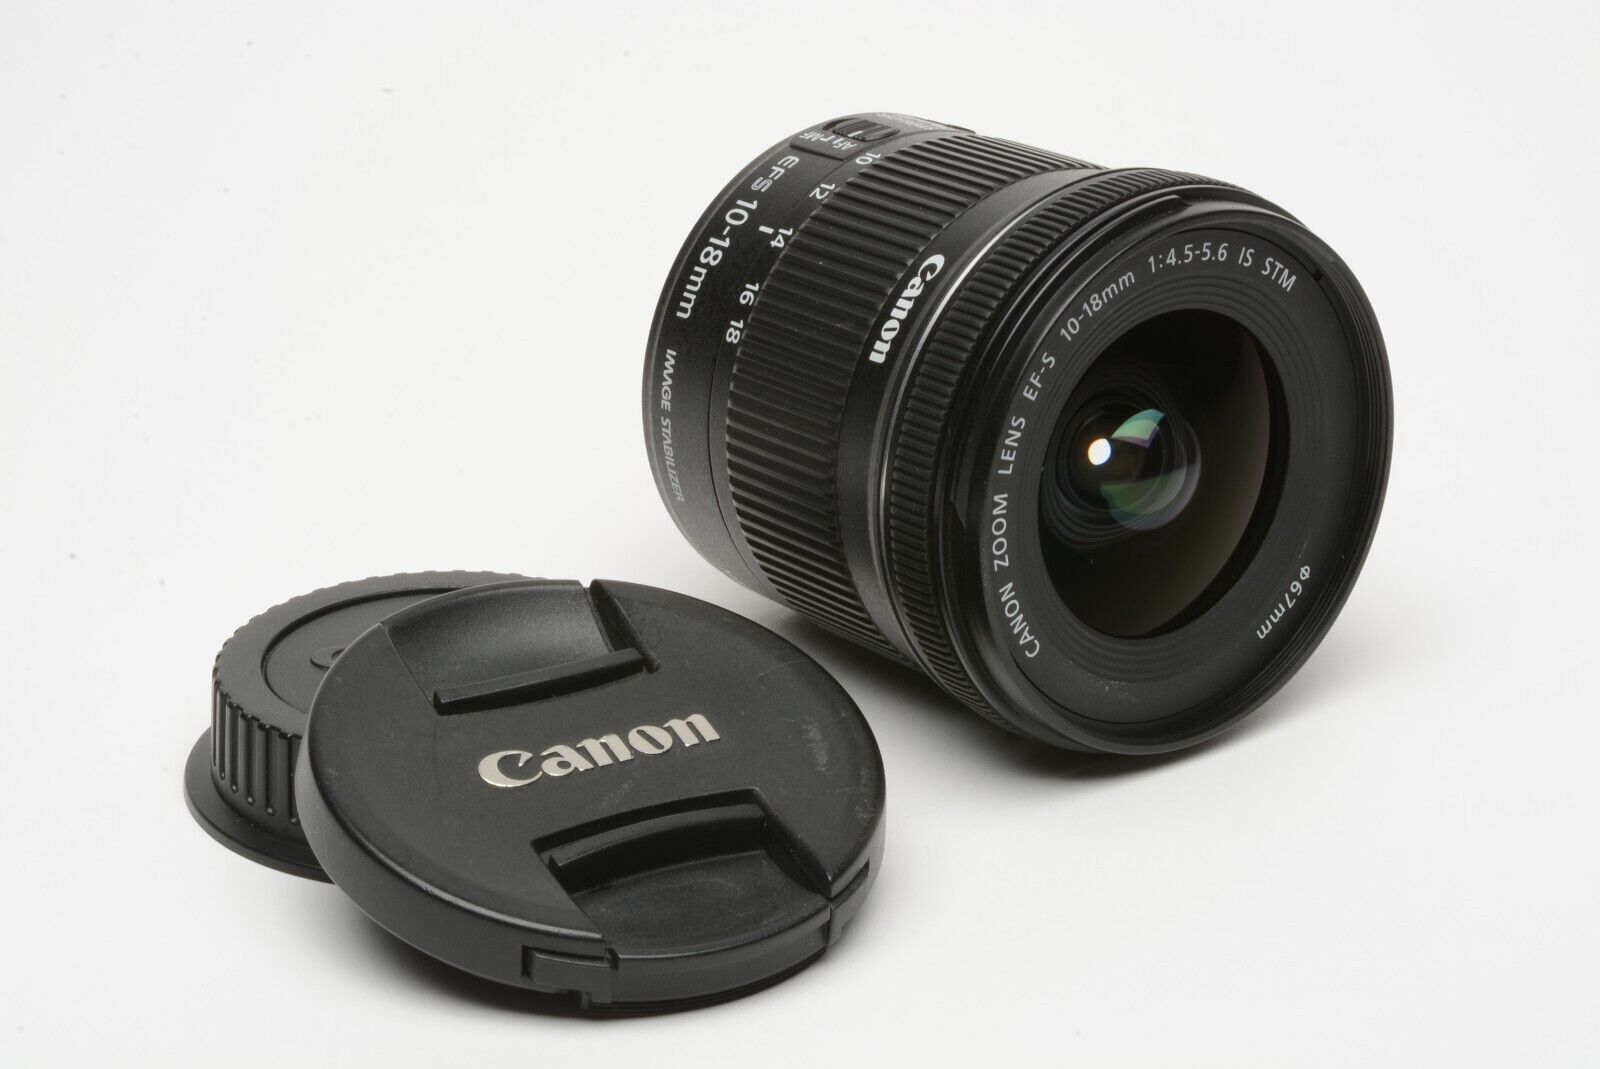 Canon EF-S 10-18mm F/4.5-5.6 IS STM ズーム…-